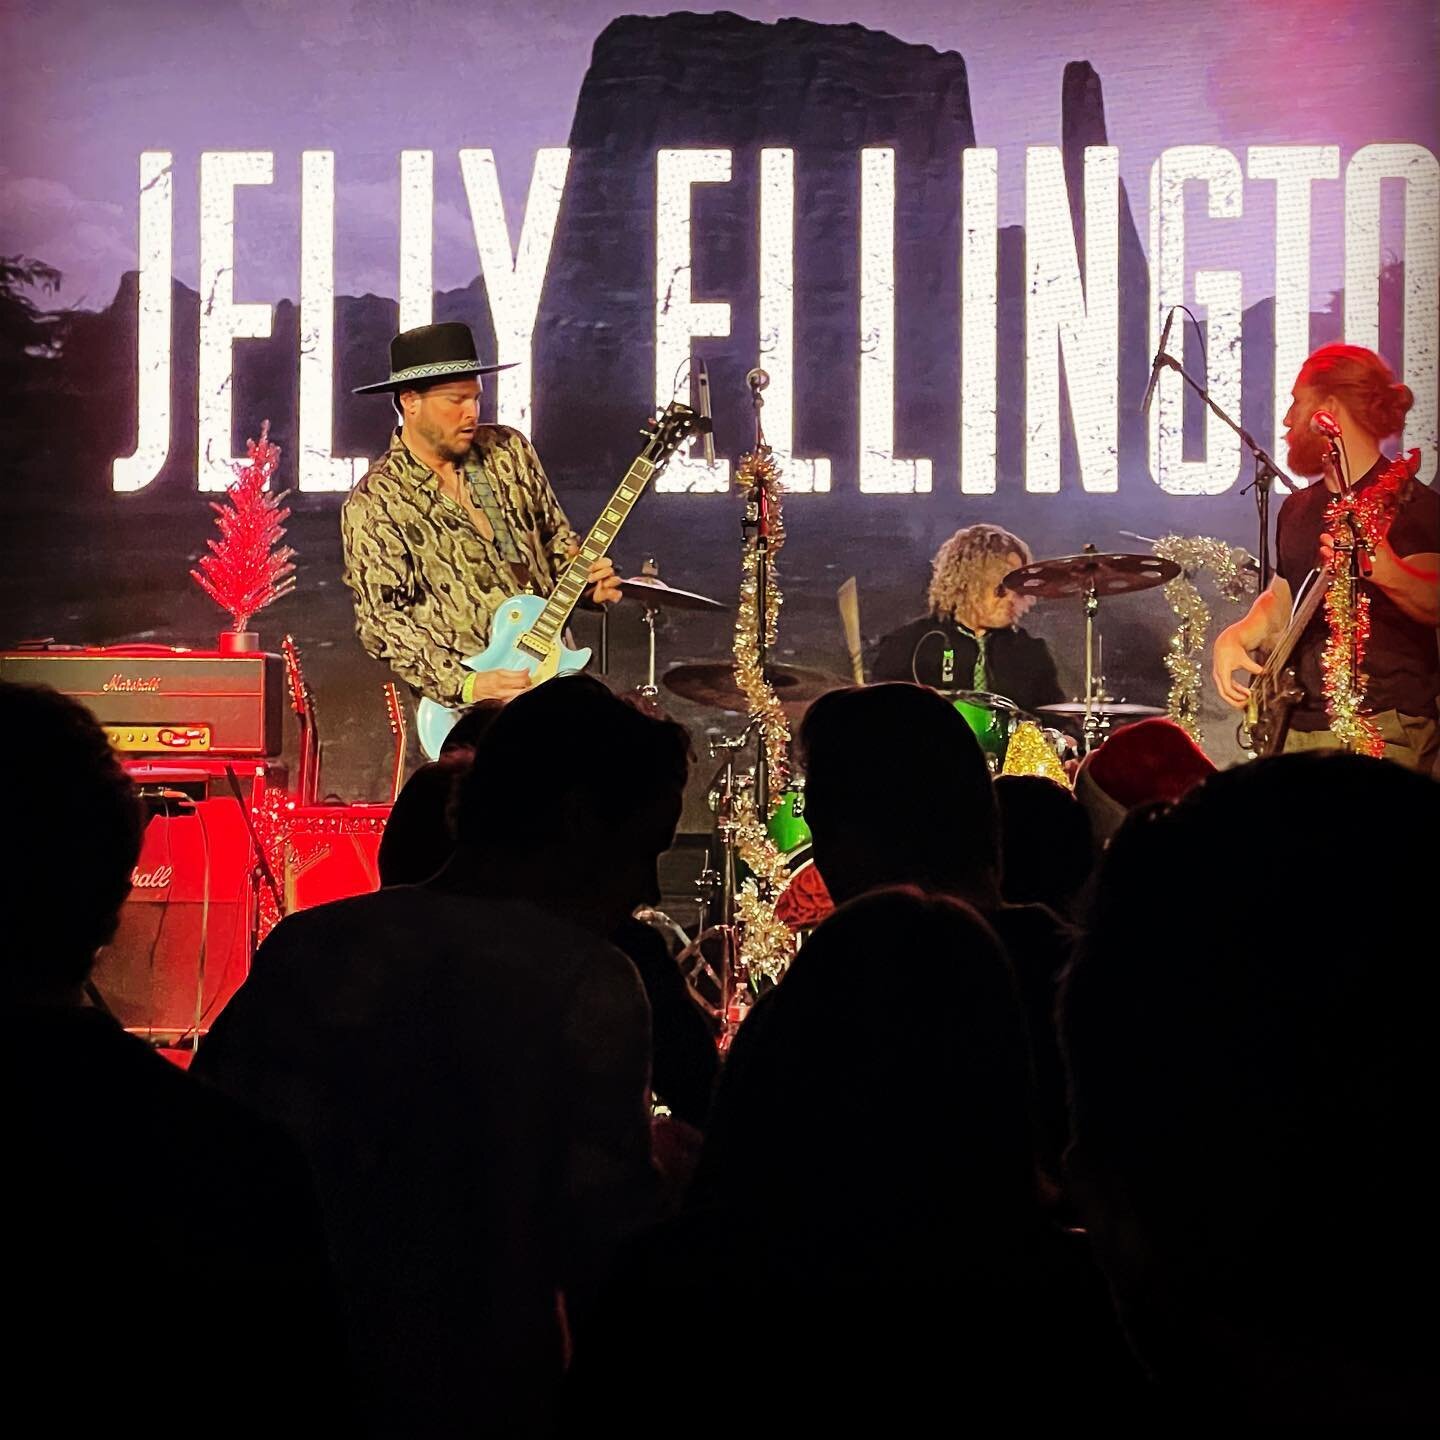 Thank you Austin for another amazing year of the Christmas Jam.🌲 Every year seems to become more and more magical. My heart is full, let love rule.❤️ 
&bull;
&bull;
&bull;
&bull;
&bull;
&bull;
&bull;
&bull;
&bull;
&bull;
&bull;
#jellyellington #acl 